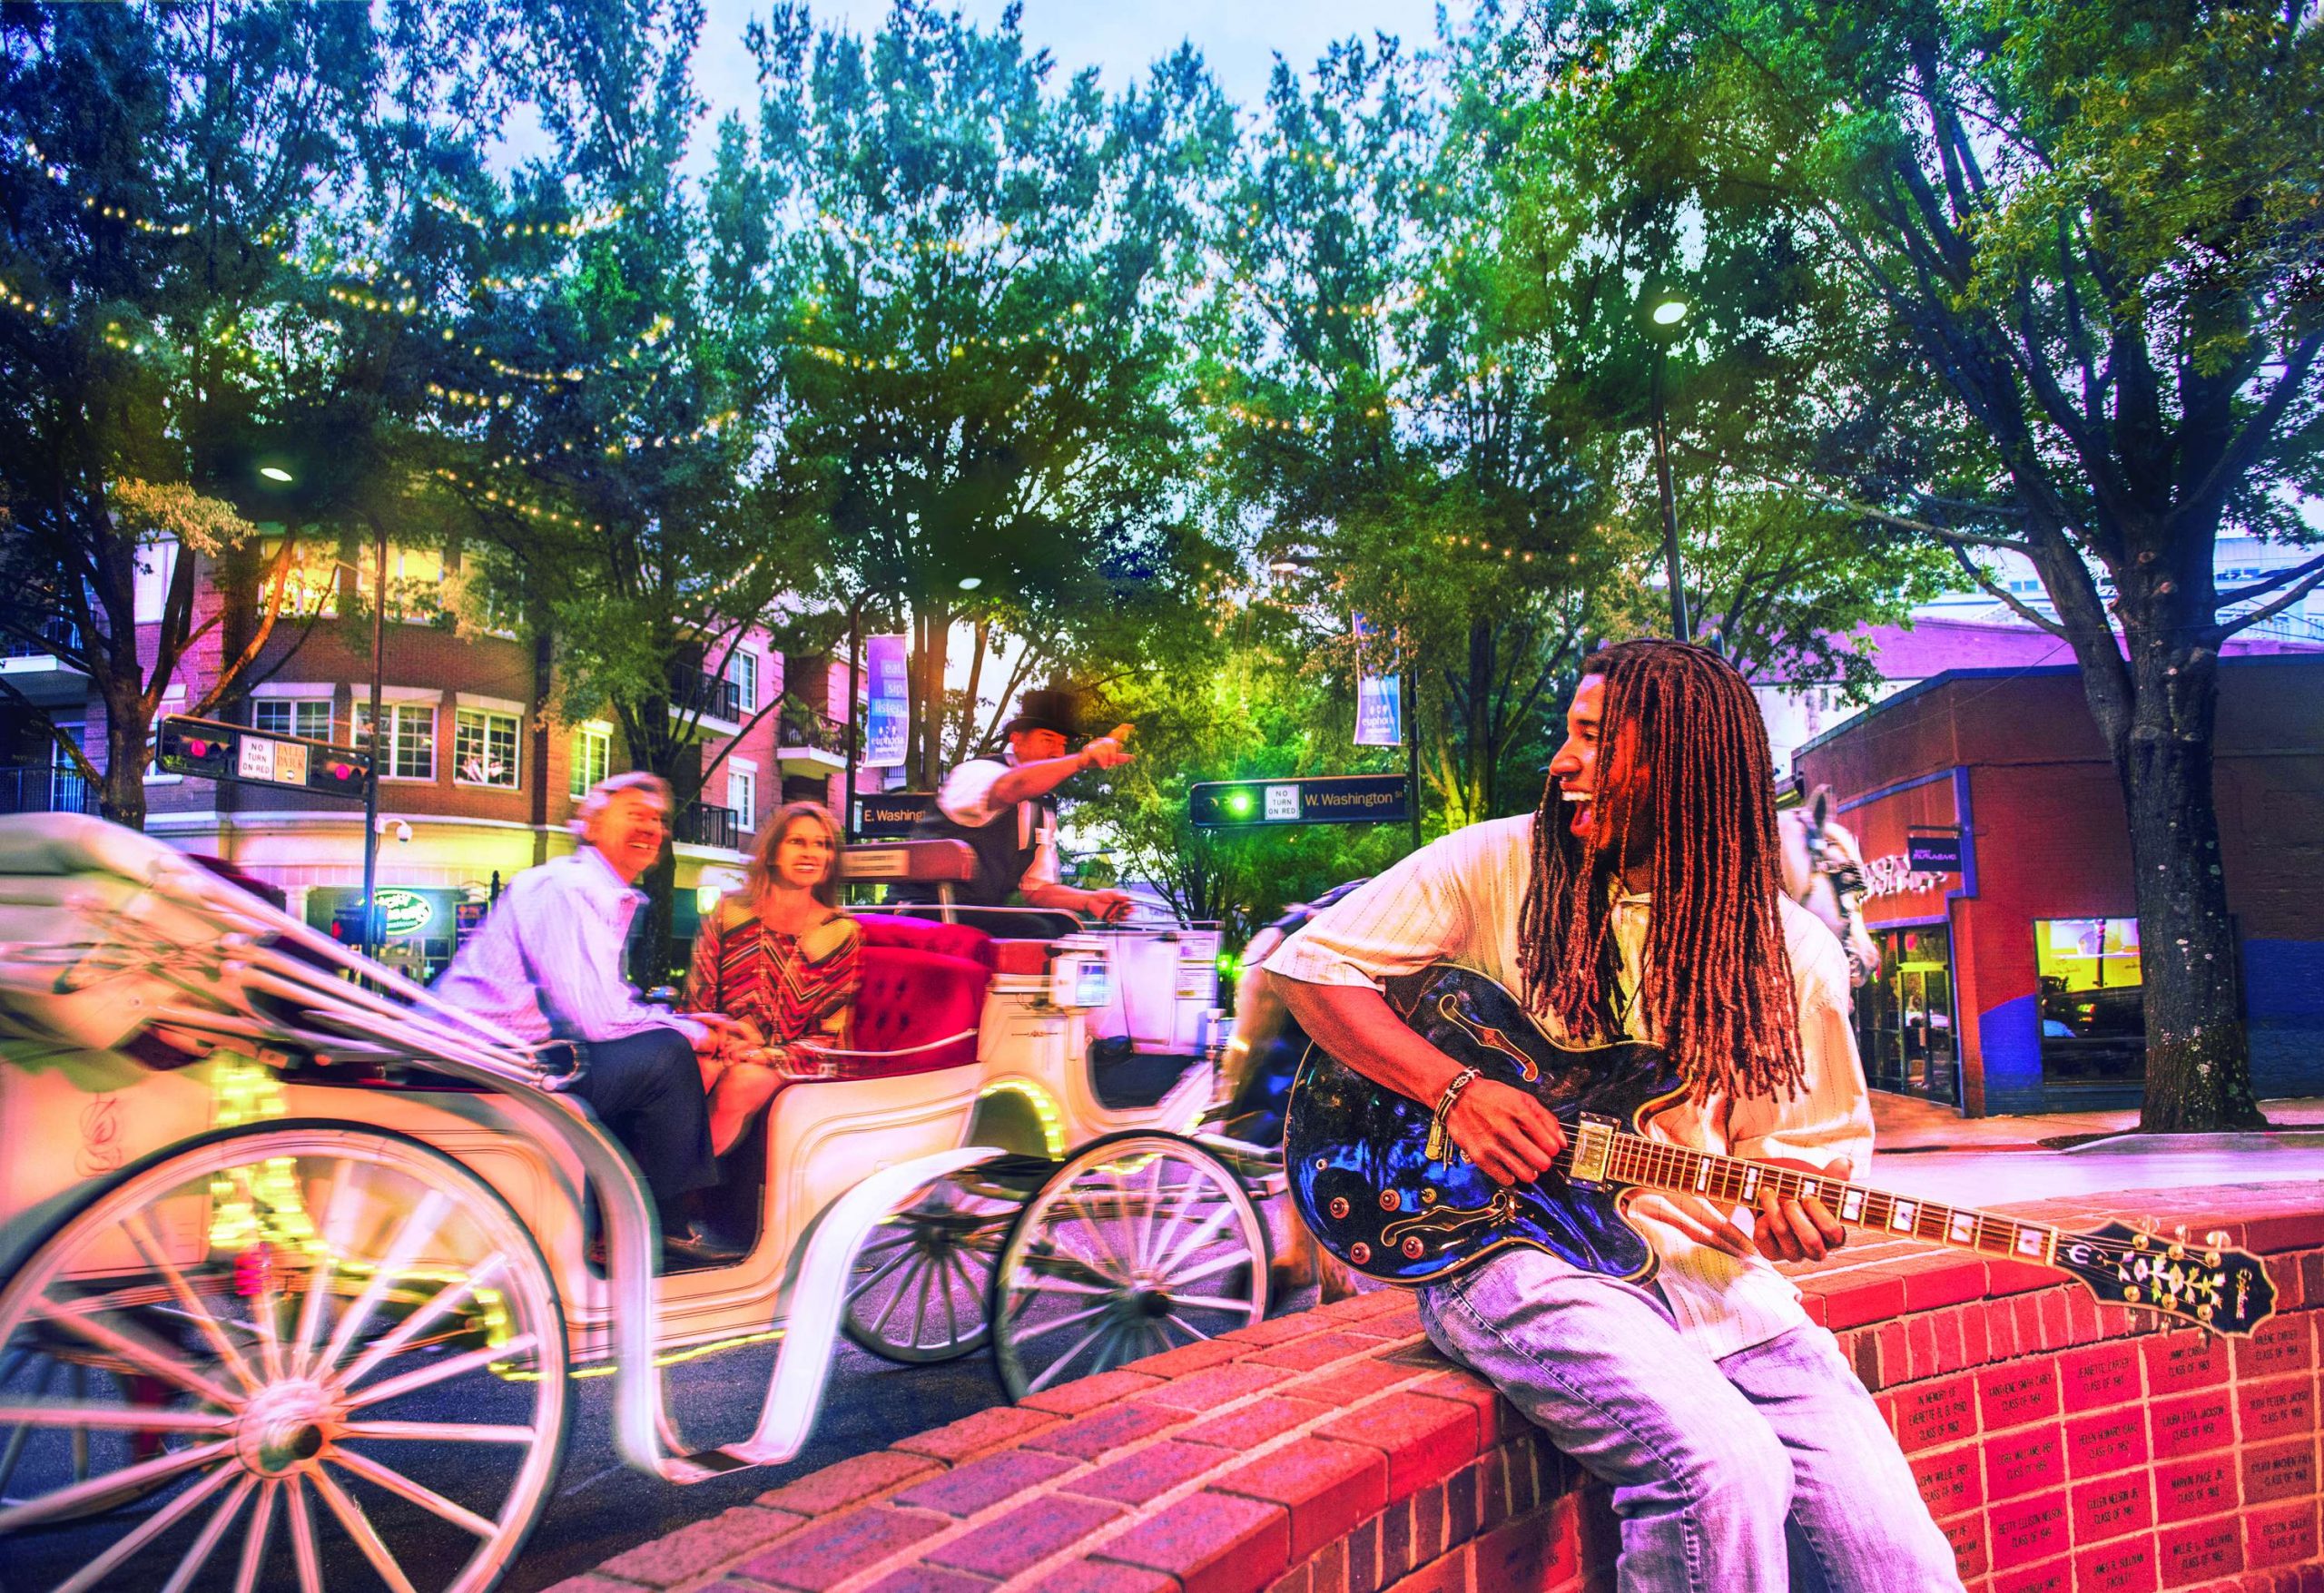 Horse-drawn carriage rides, live music, clubs and dining â there is something everyone will enjoy on Greenville's Main Street.